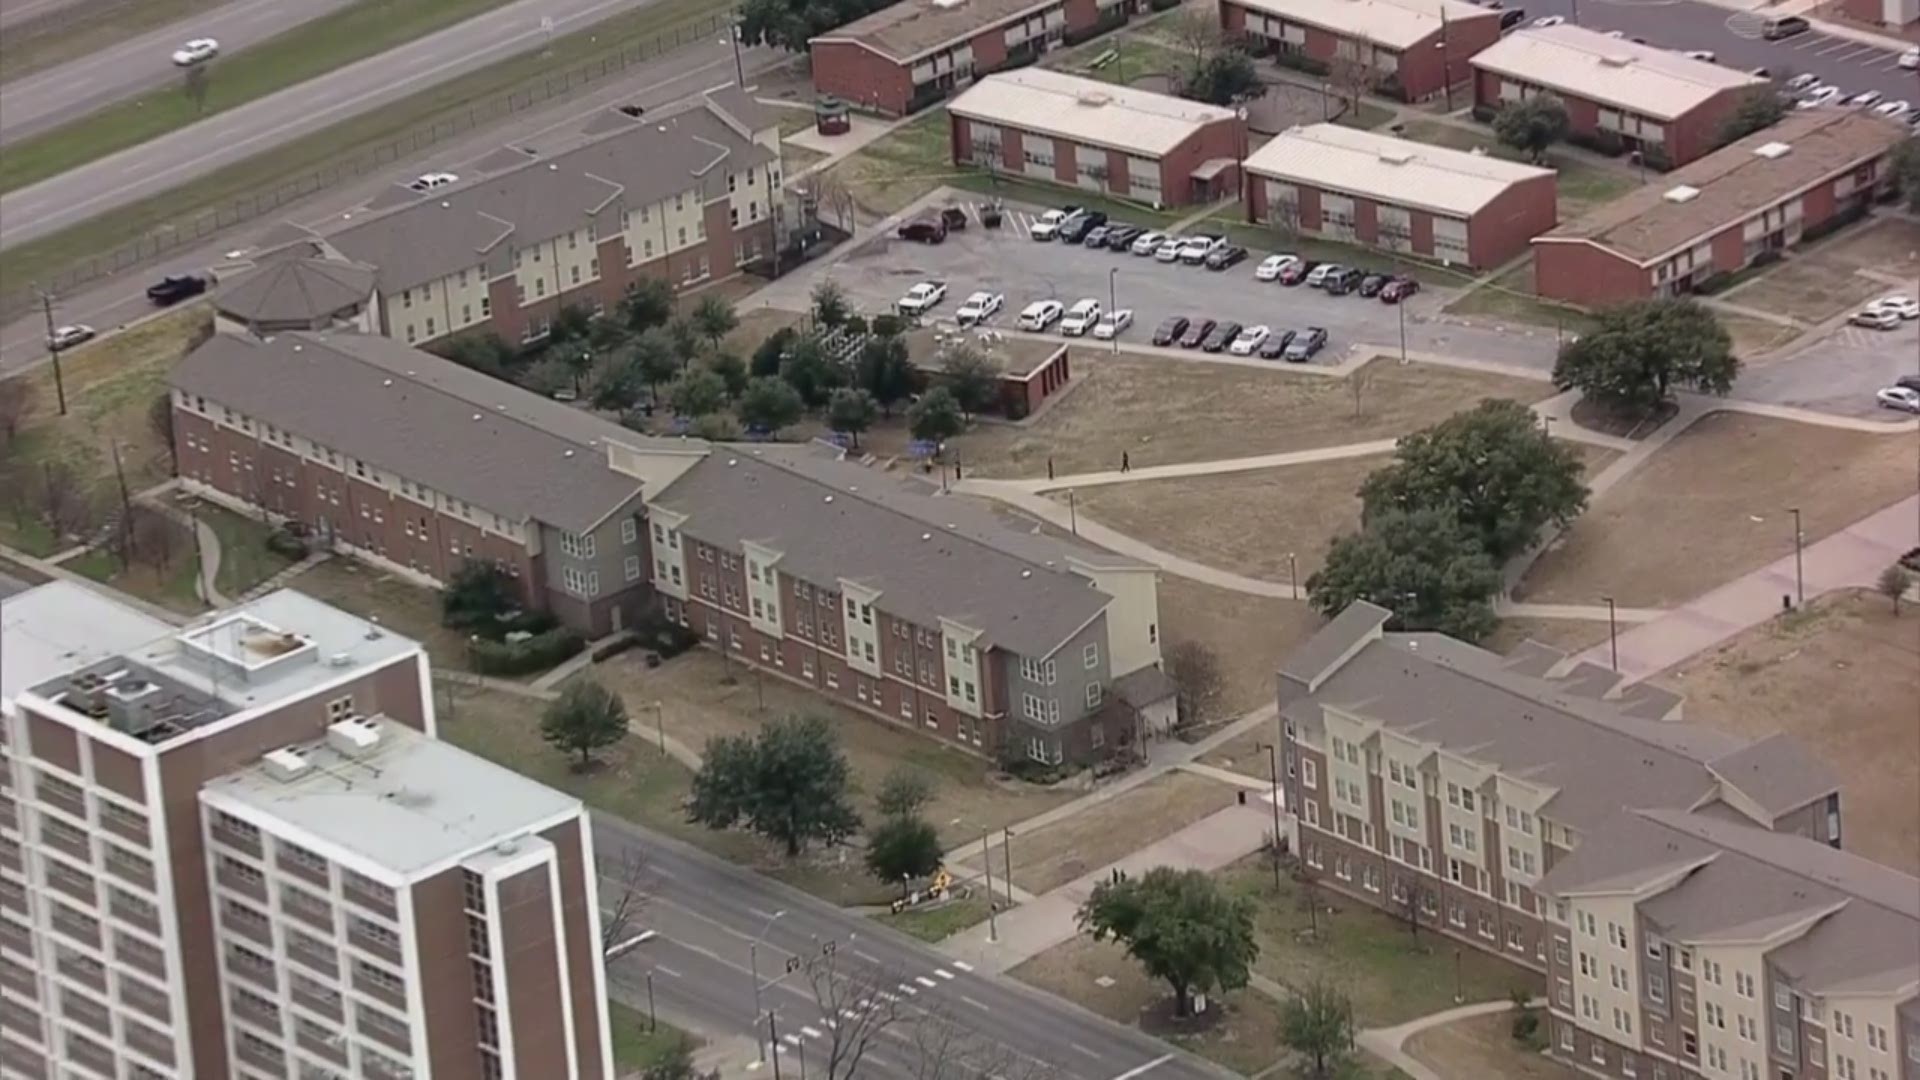 Two people were killed and another person has been taken to the hospital following a shooting at Texas A&M University-Commerce on Monday, according to the university